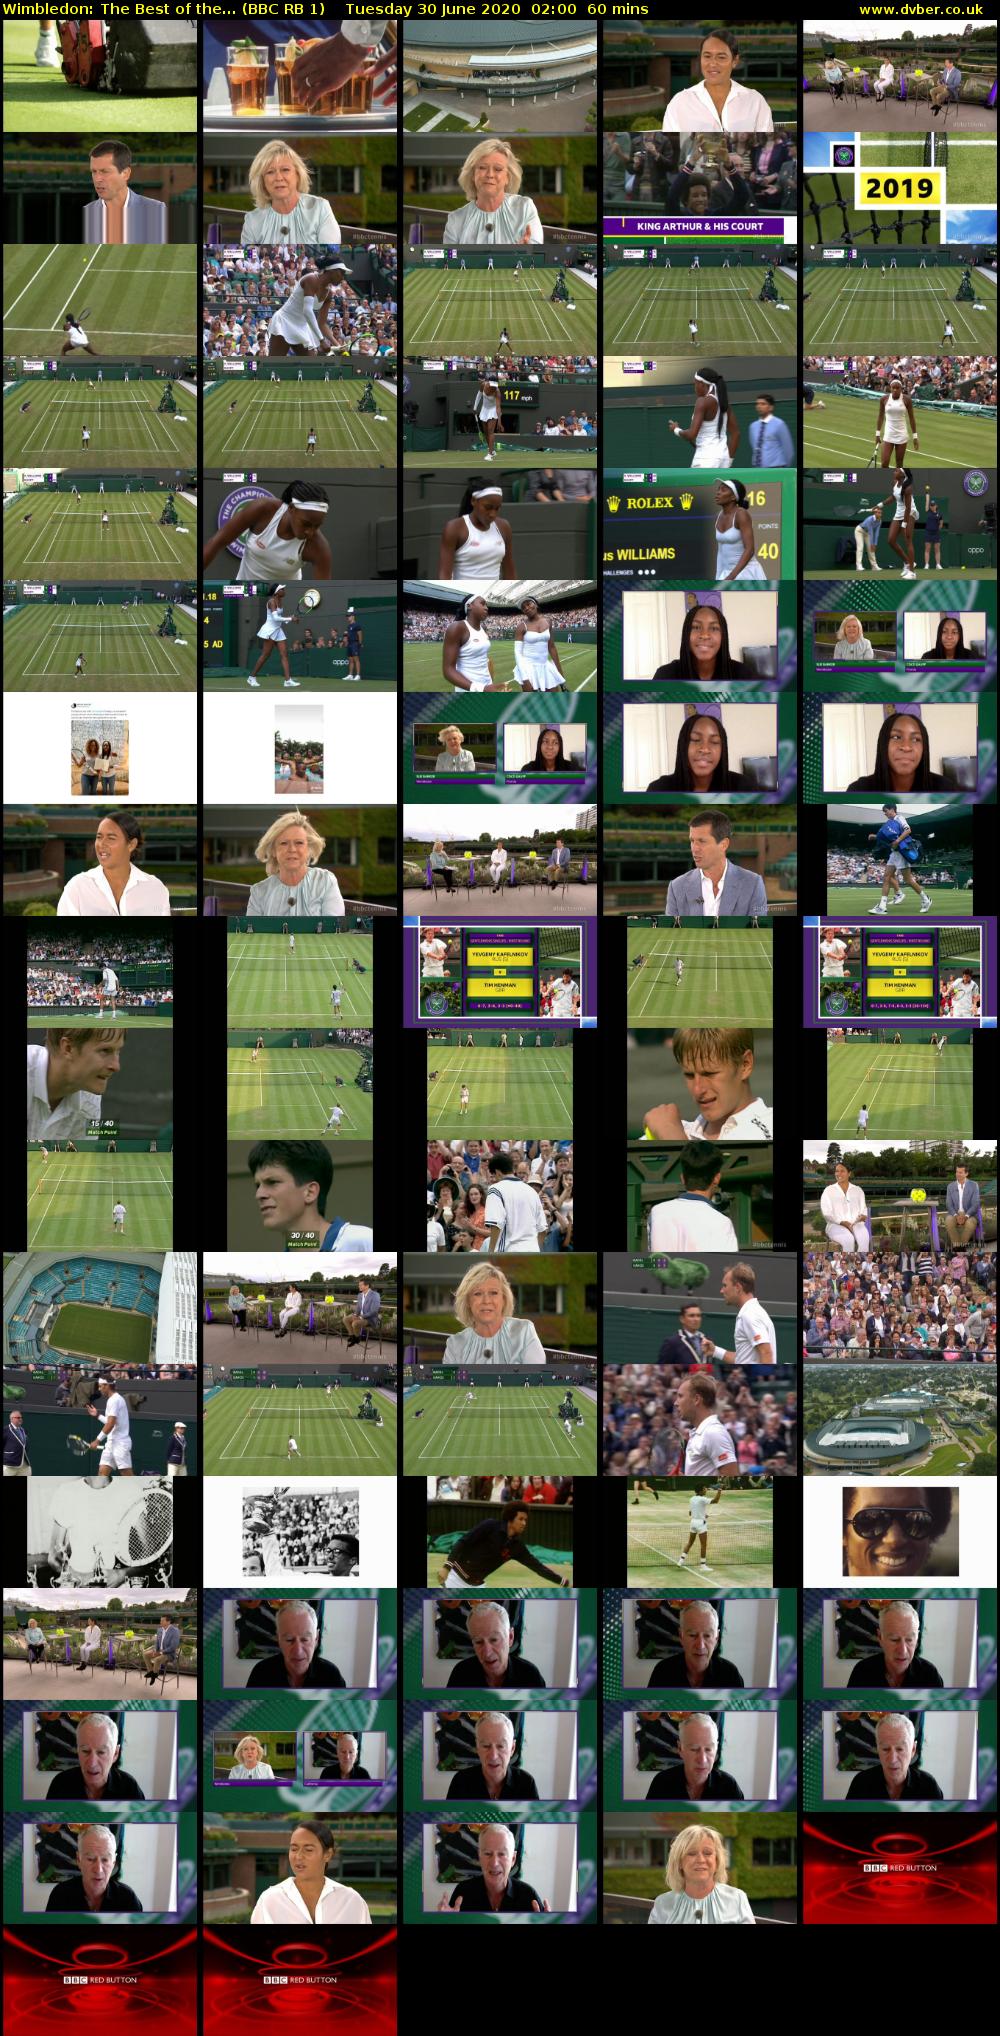 Wimbledon: The Best of the... (BBC RB 1) Tuesday 30 June 2020 02:00 - 03:00